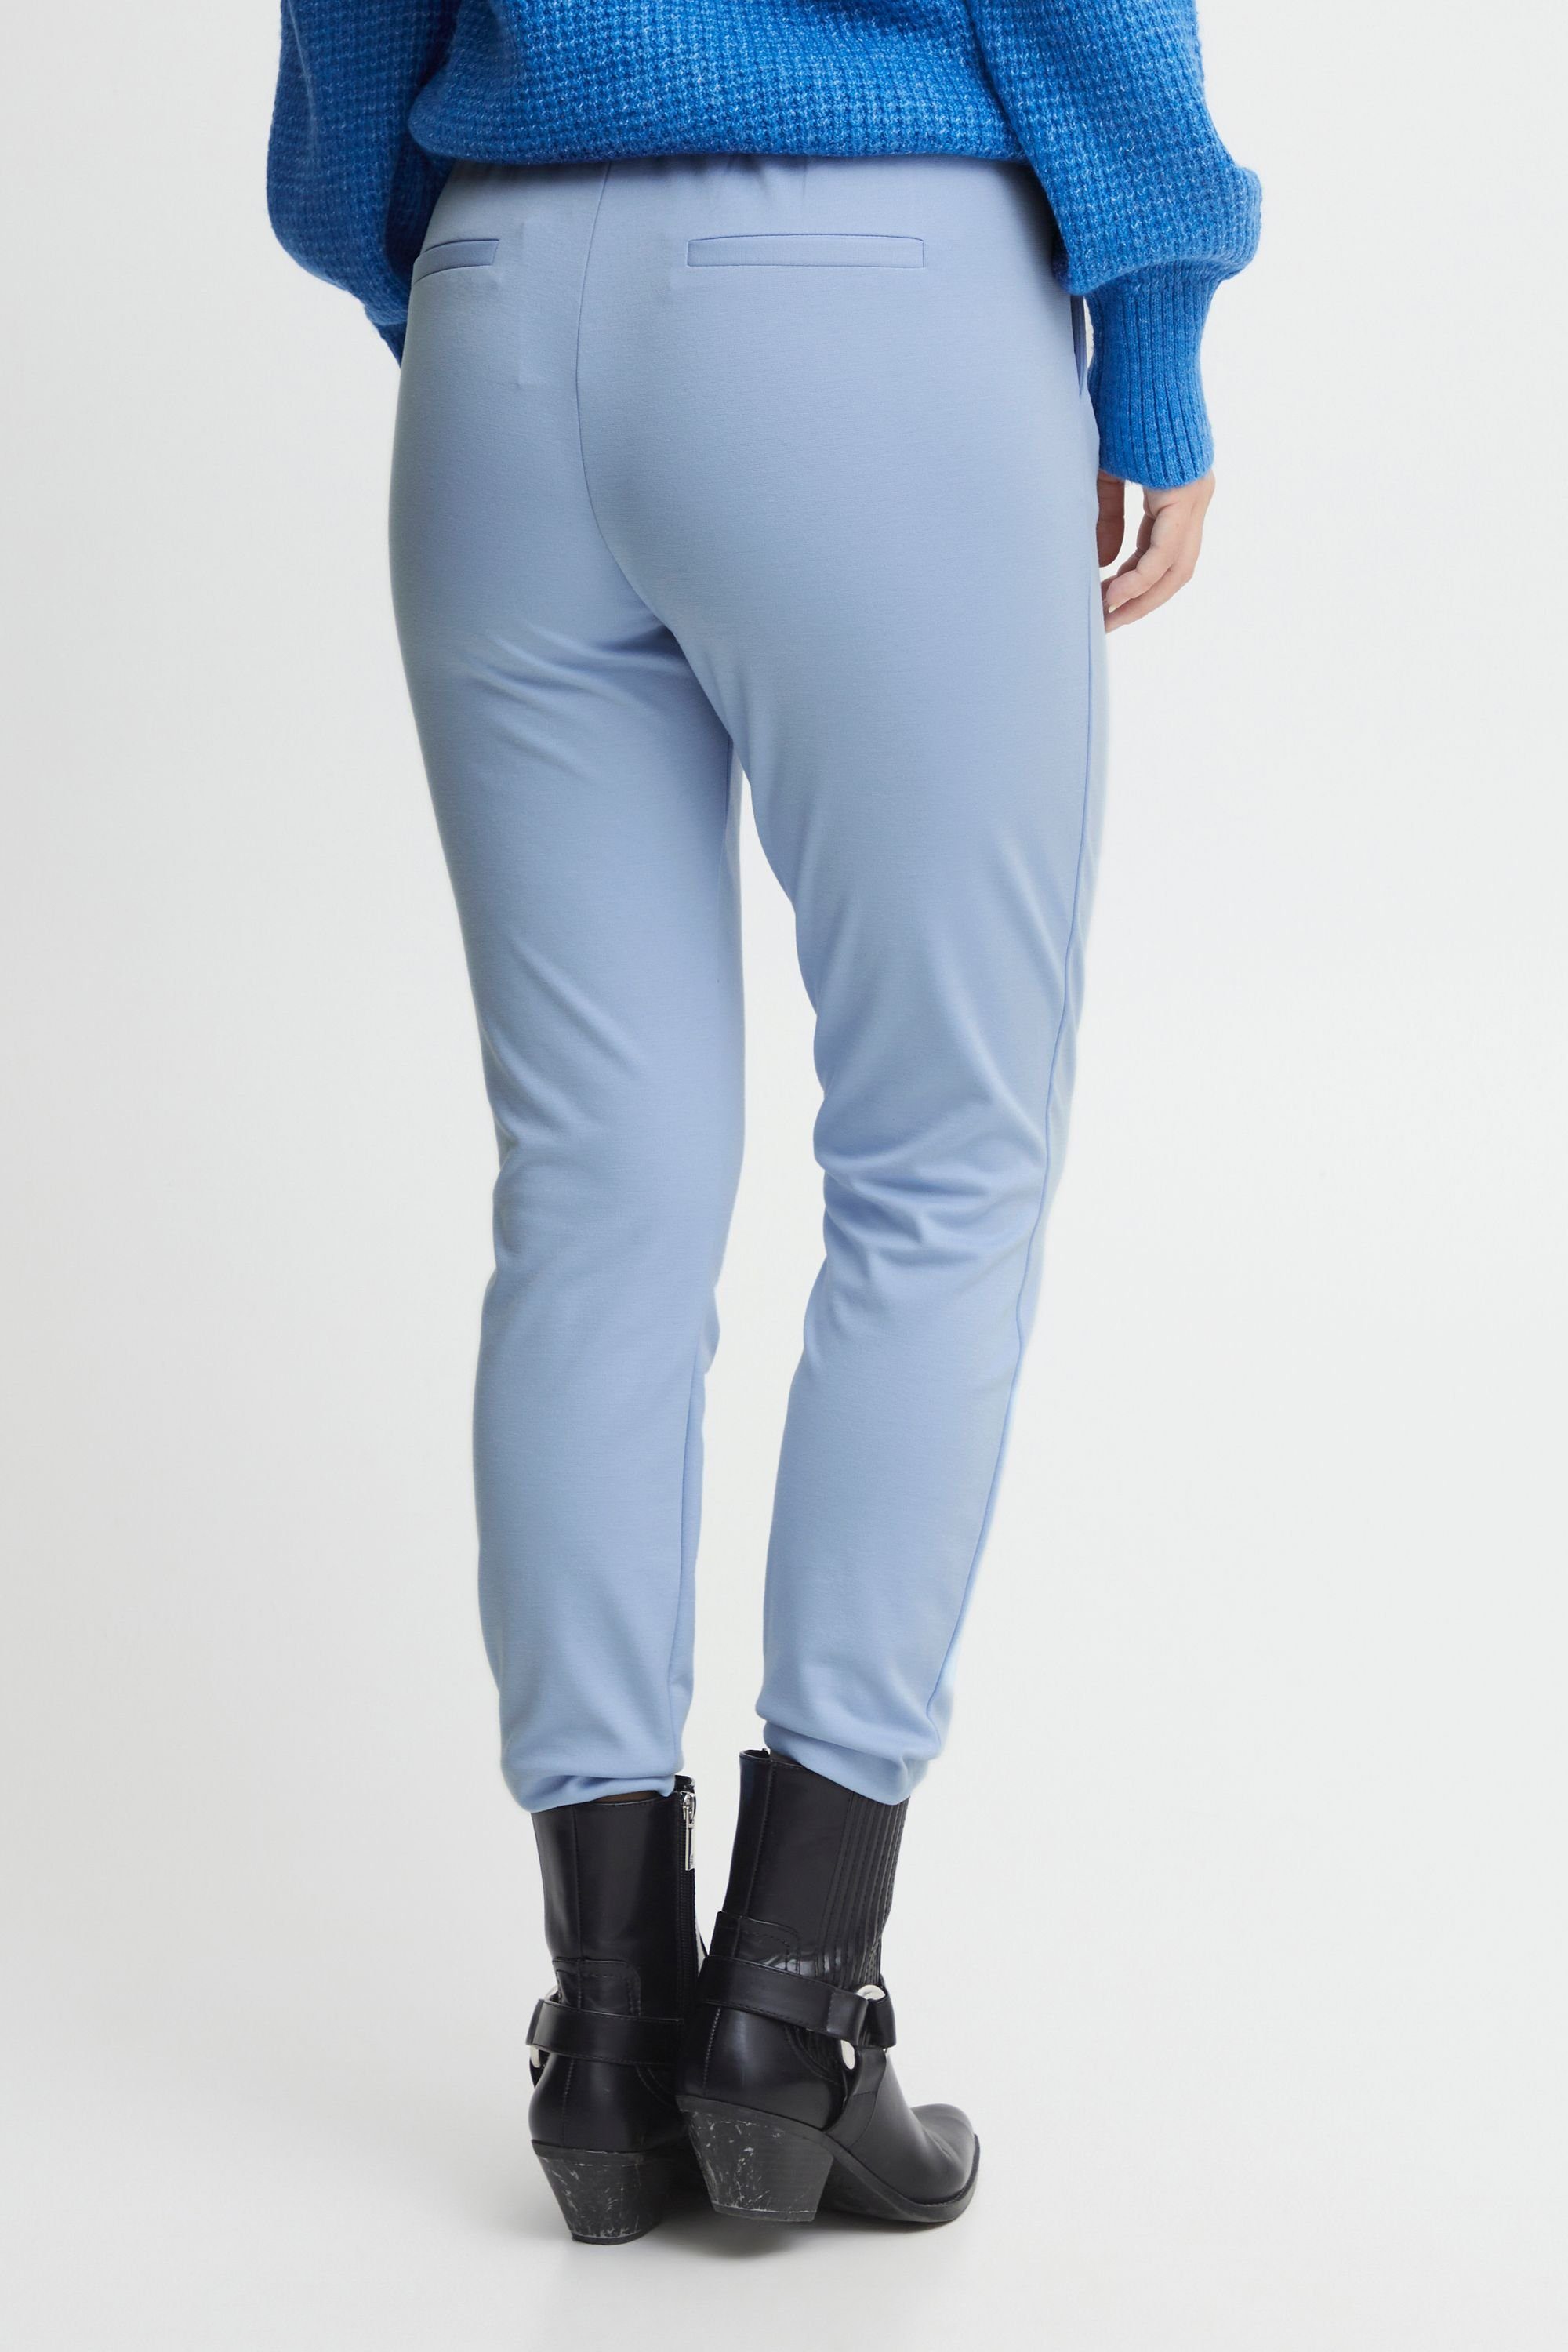 b.young Stoffhose BYRIZETTA PLEAT Blue PANTS - (144121) 20812848 Bell